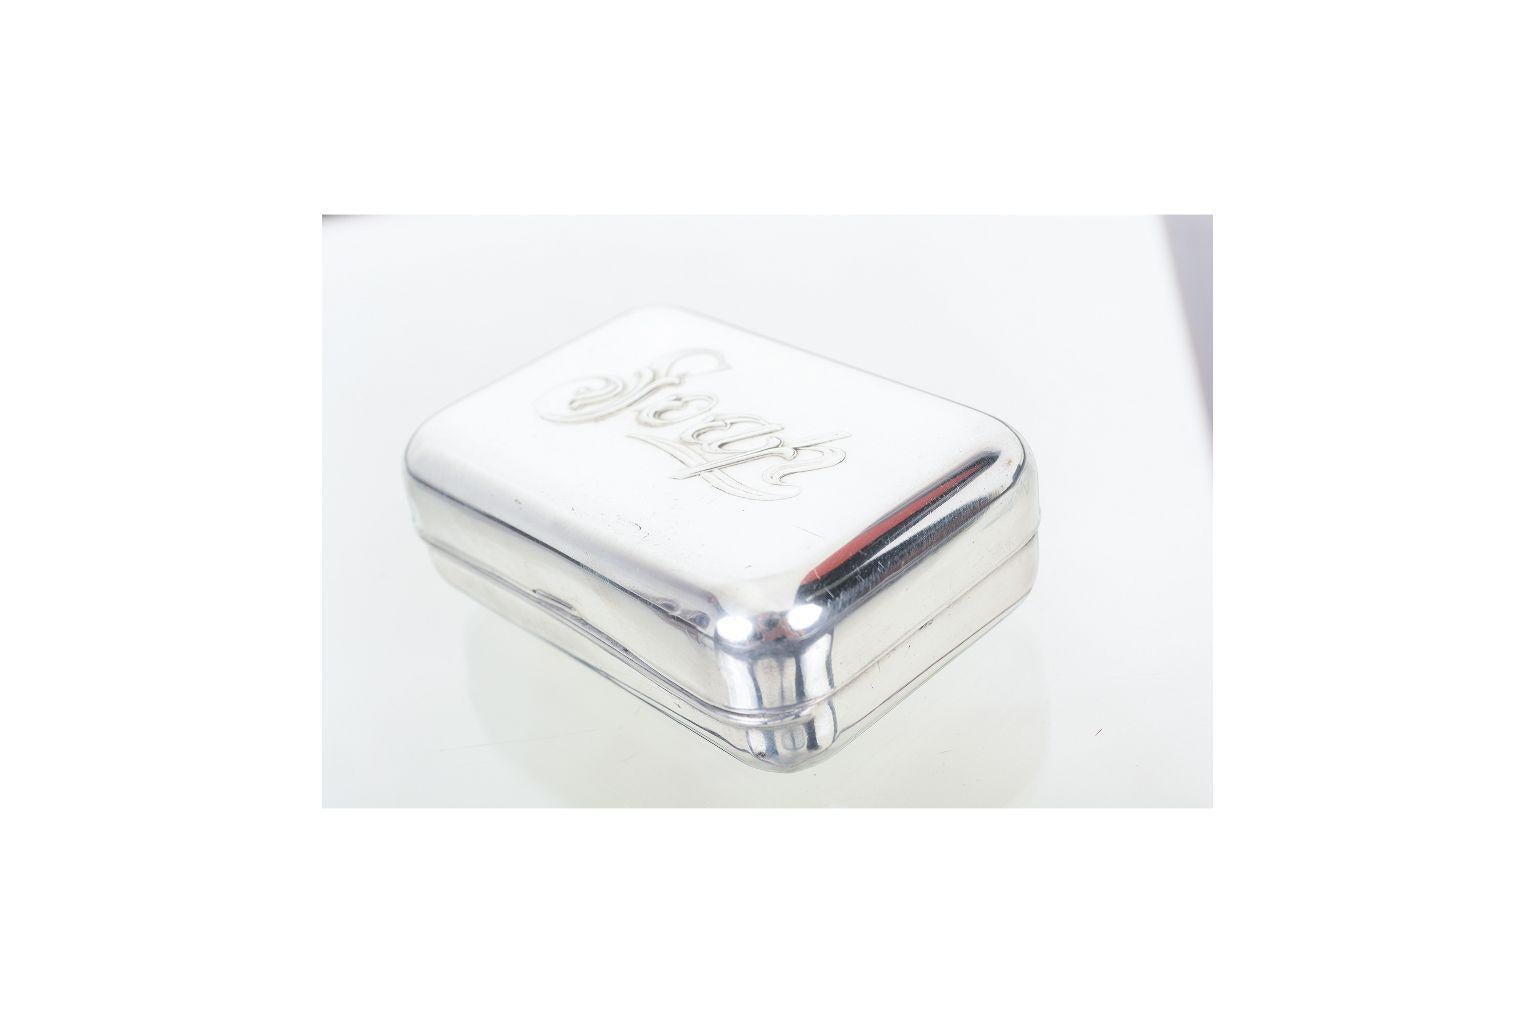 For your consideration: Vintage soap covered carry container dish travel toiletry case in aluminum

Dimensions: 3 3/4